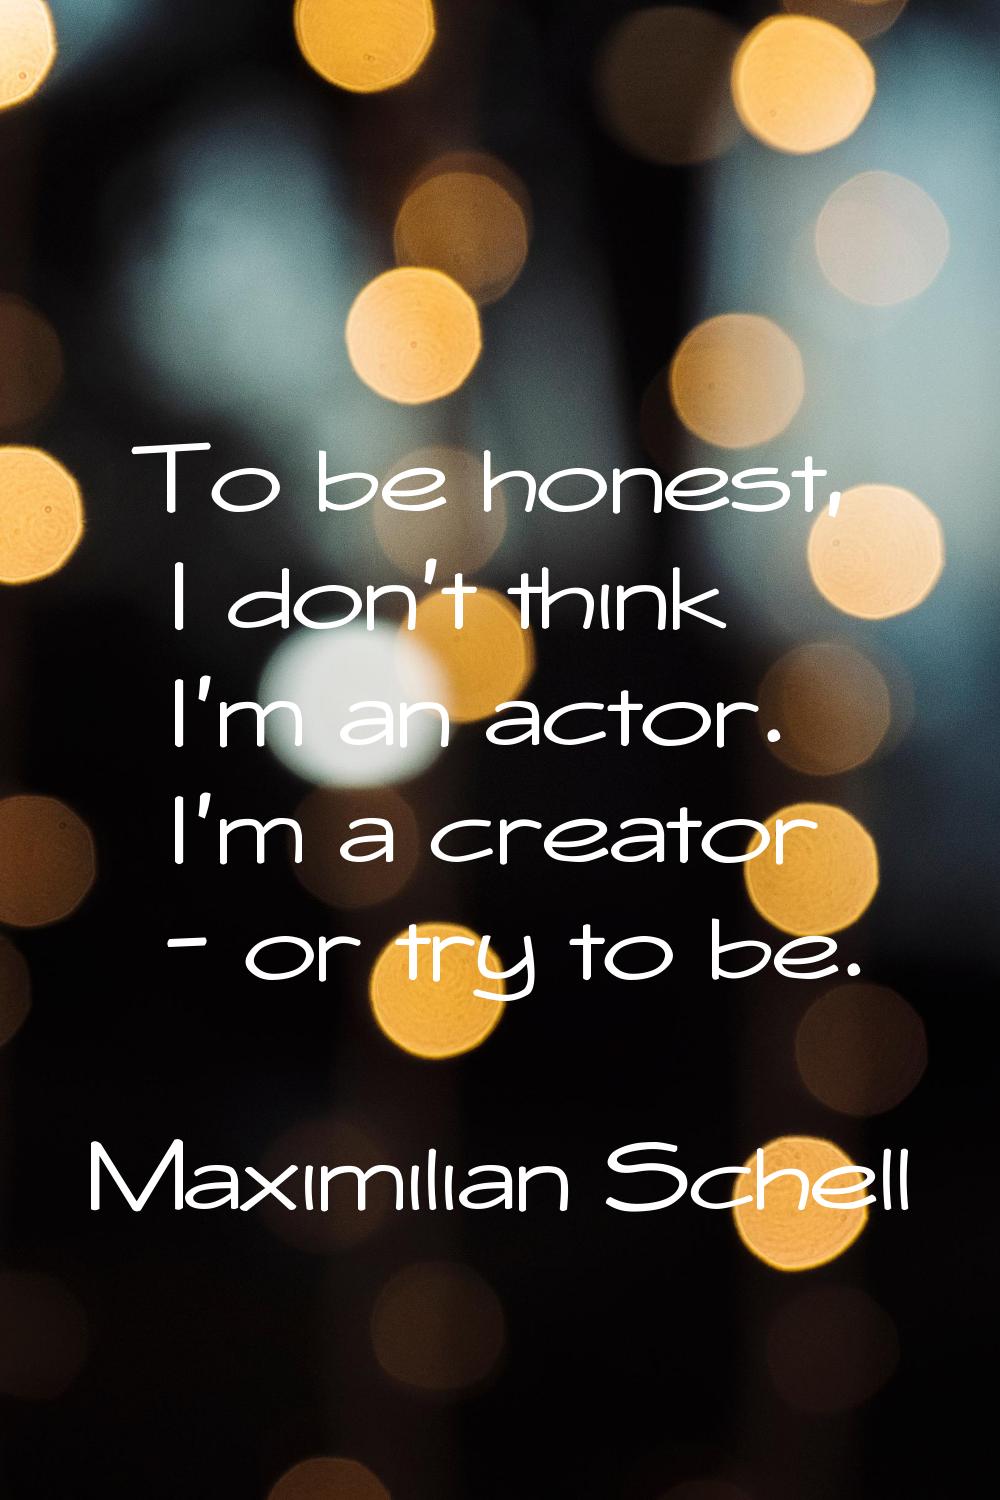 To be honest, I don't think I'm an actor. I'm a creator - or try to be.